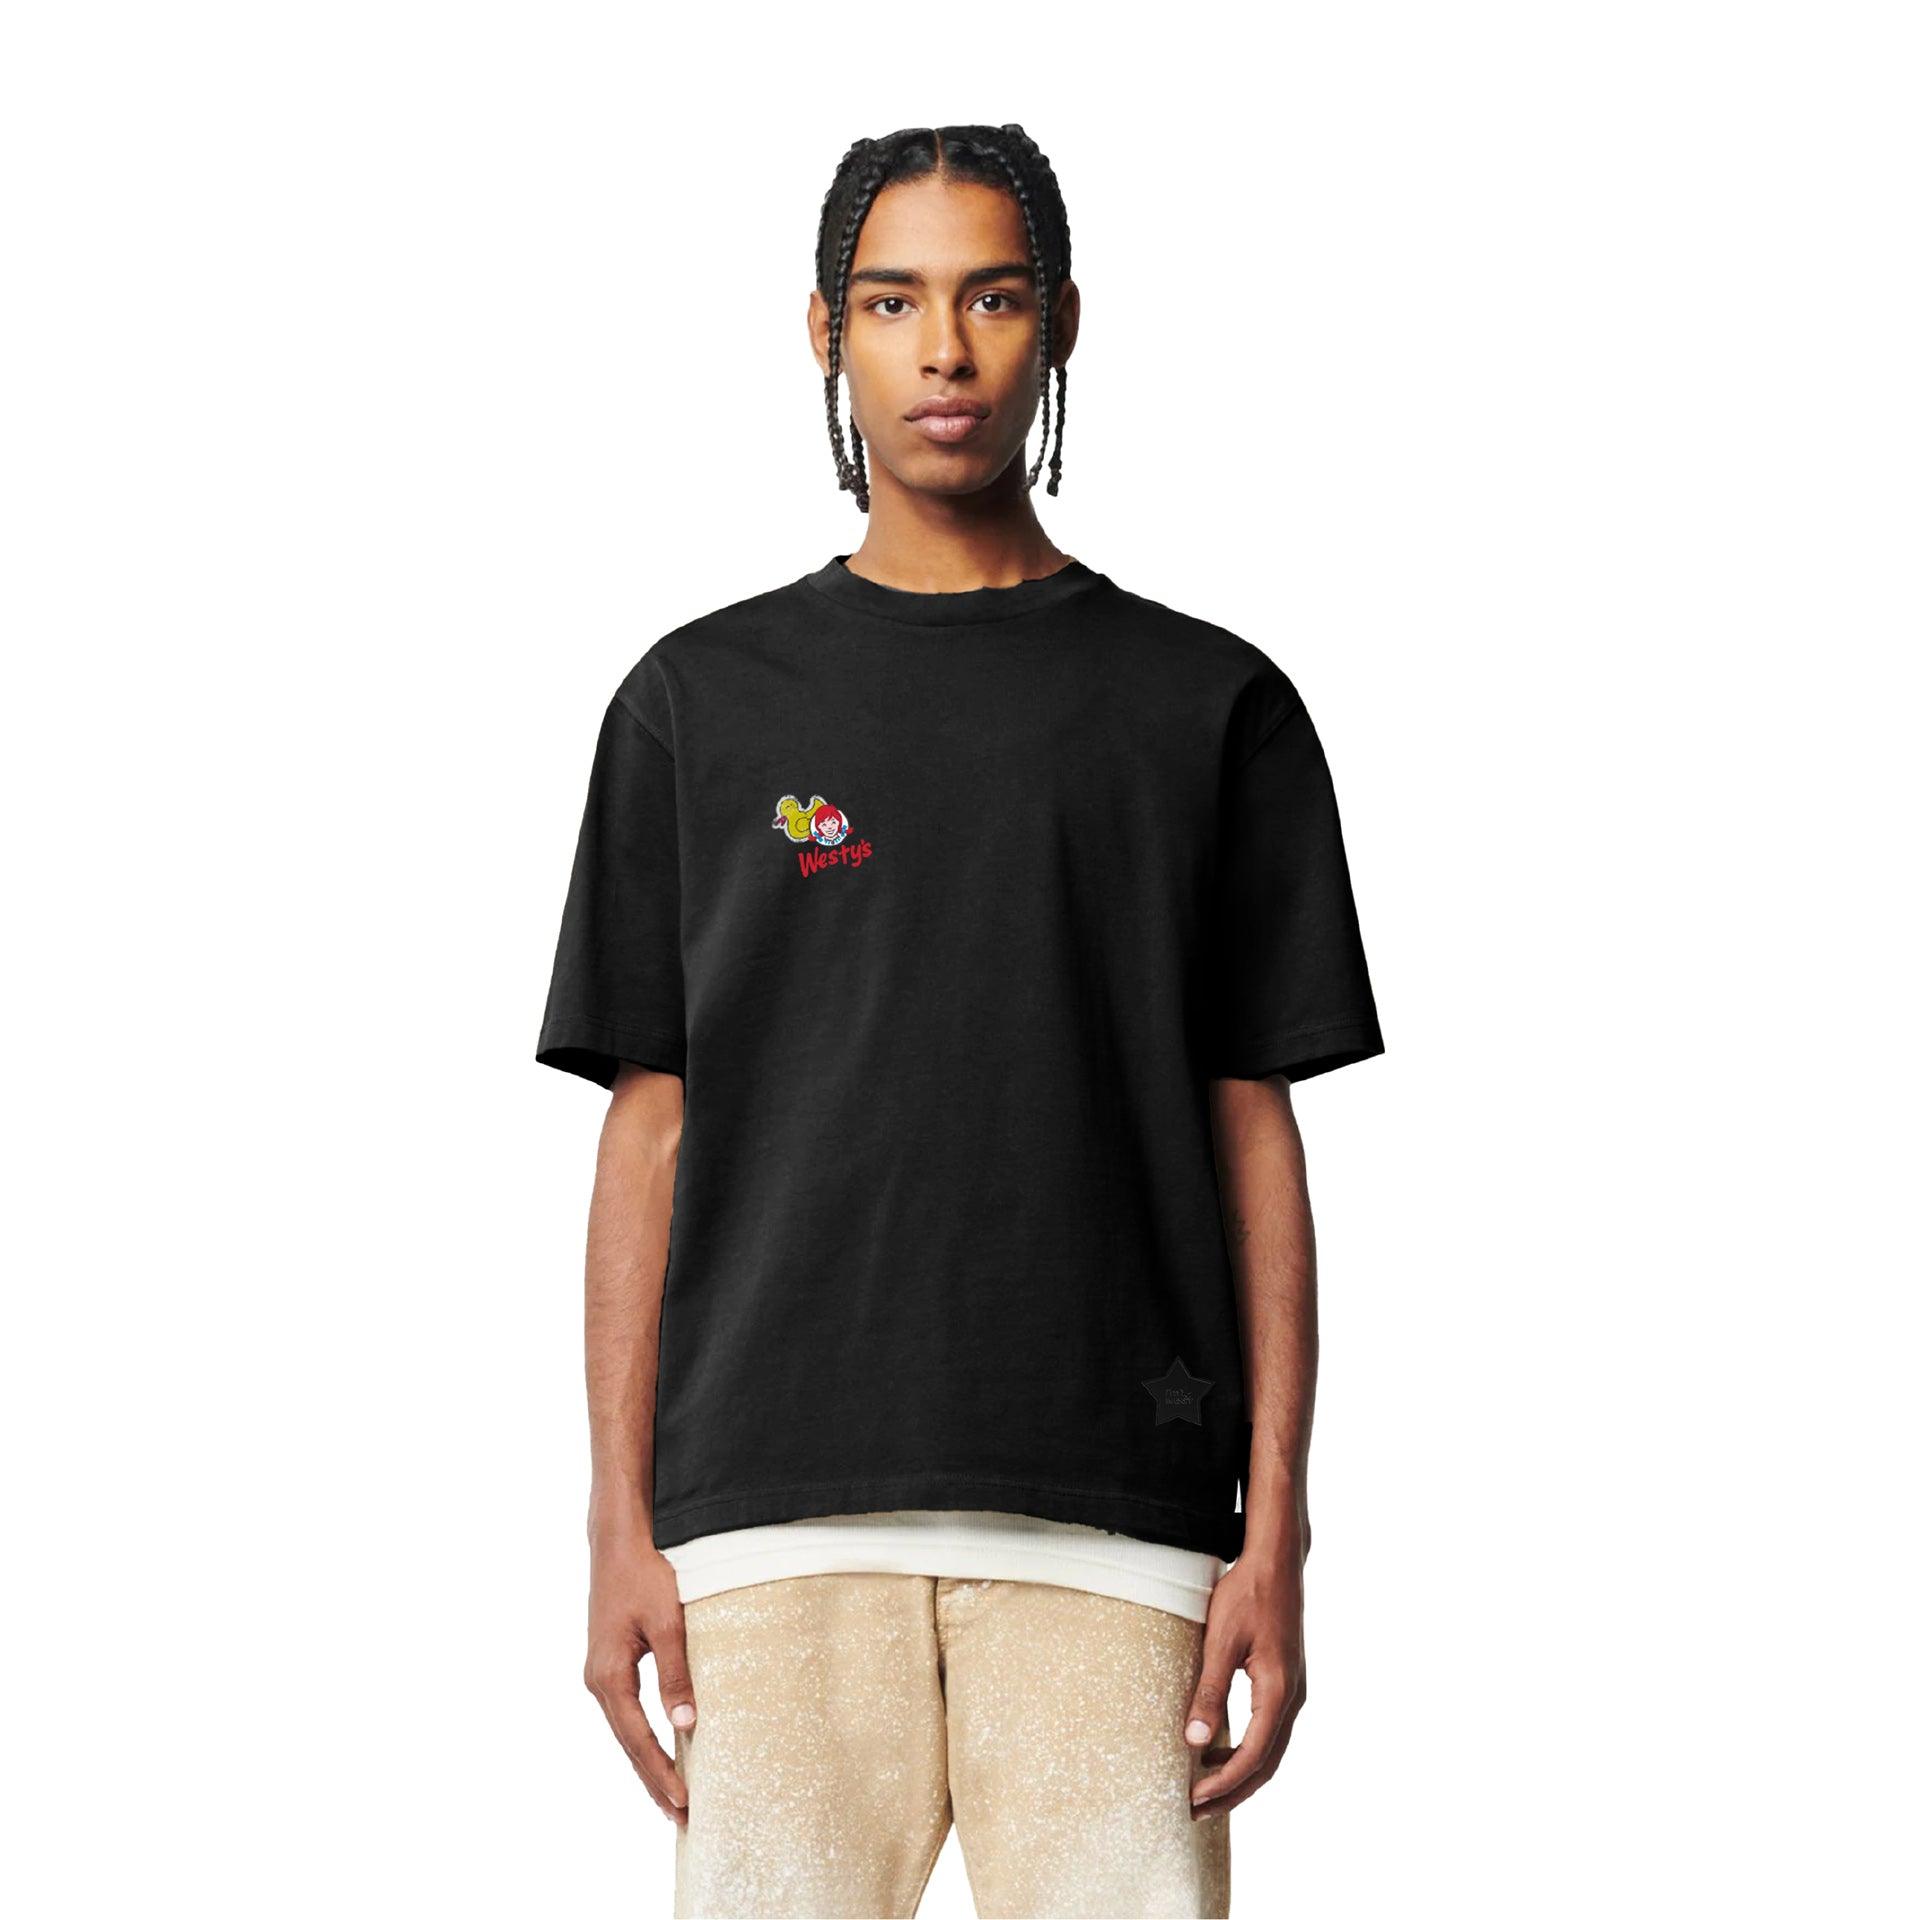 Black T-shirt From I'm West - WECRE8